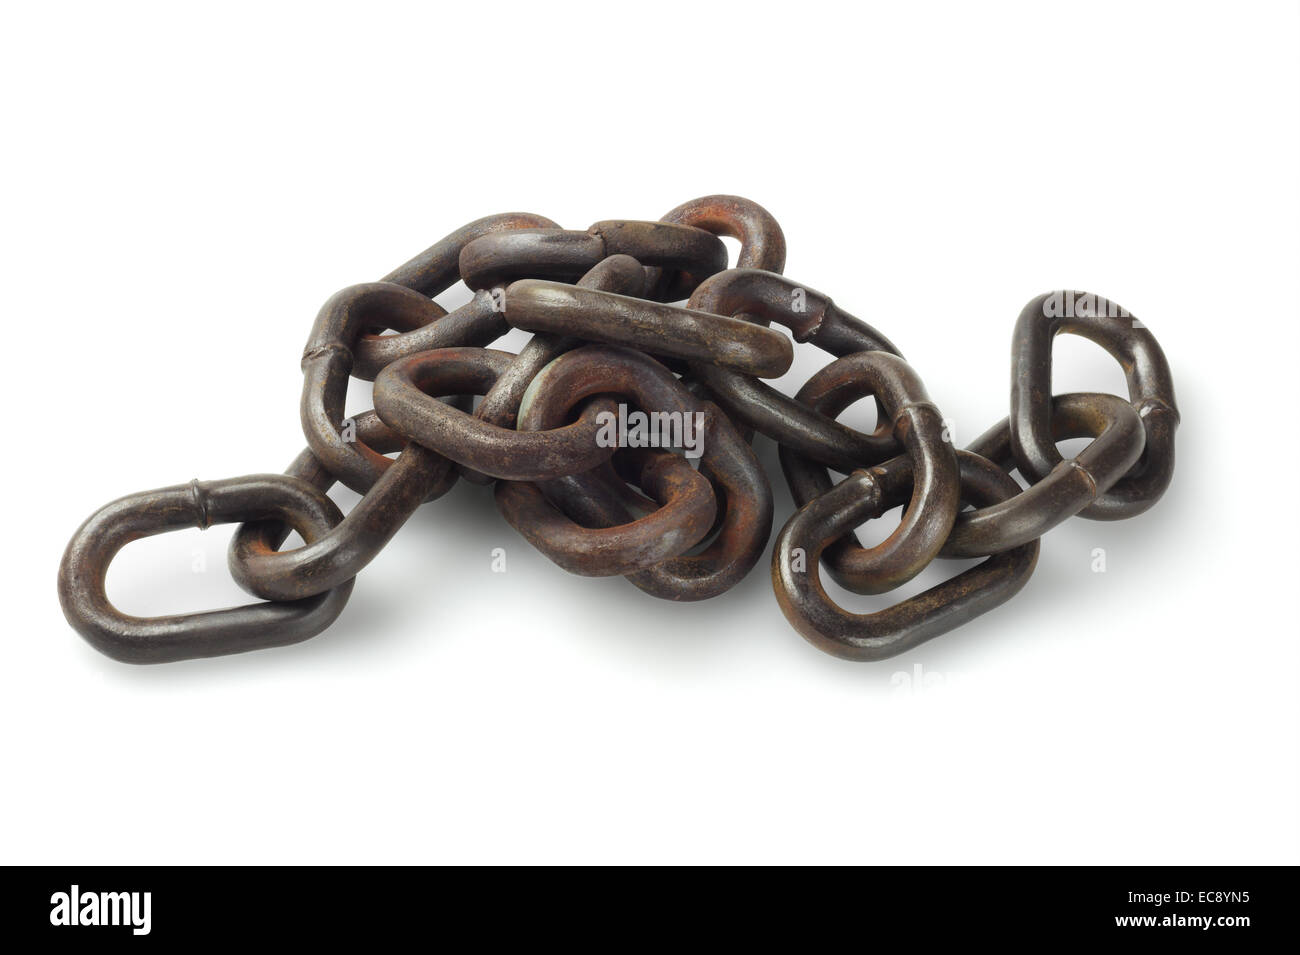 Metal Chain Lying On White Background Stock Photo